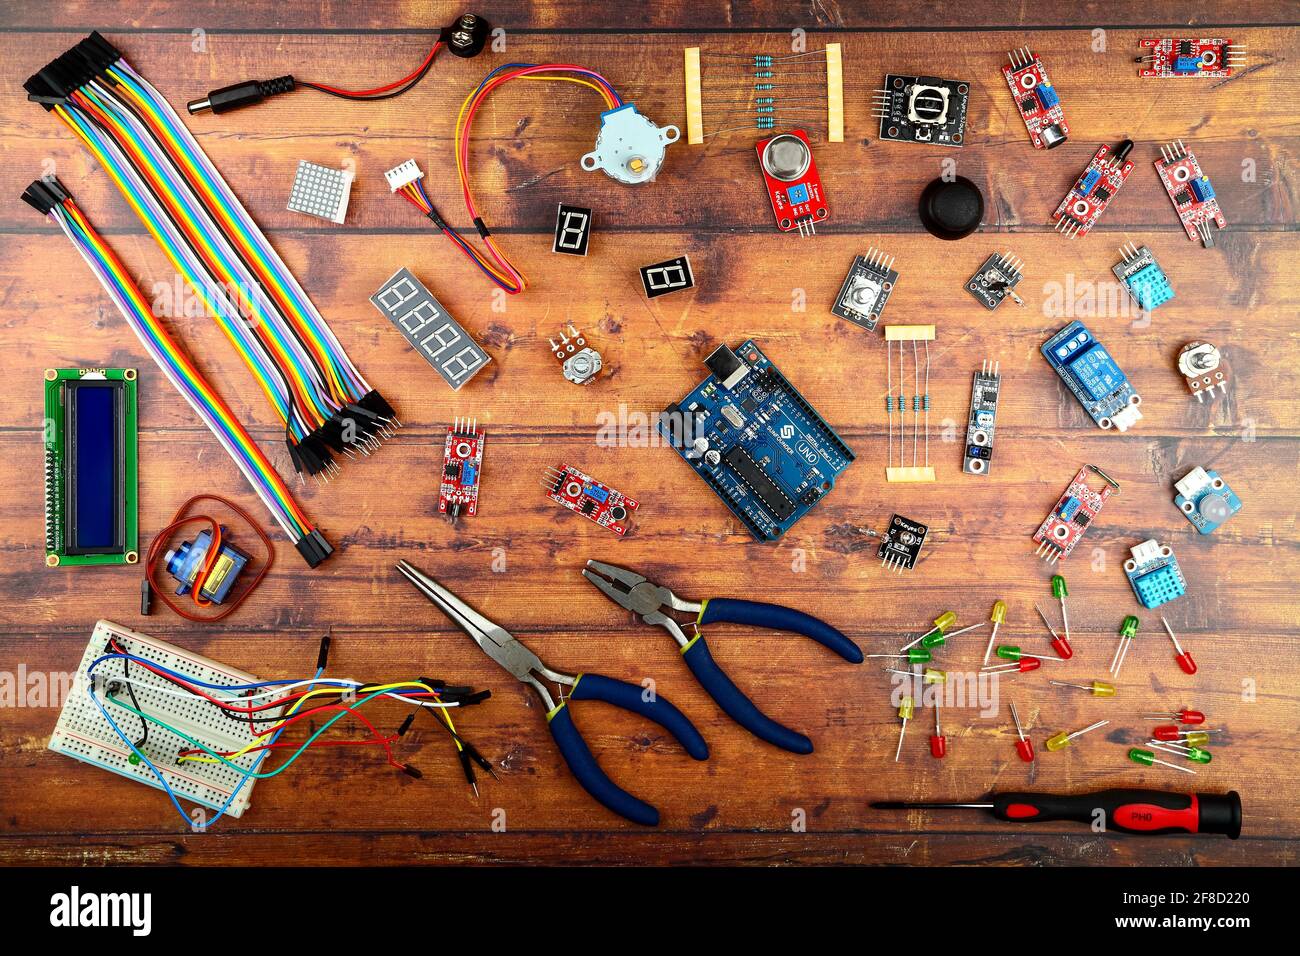 Arduino uno and electronic components flatlay on a wooden rustic background Stock Photo